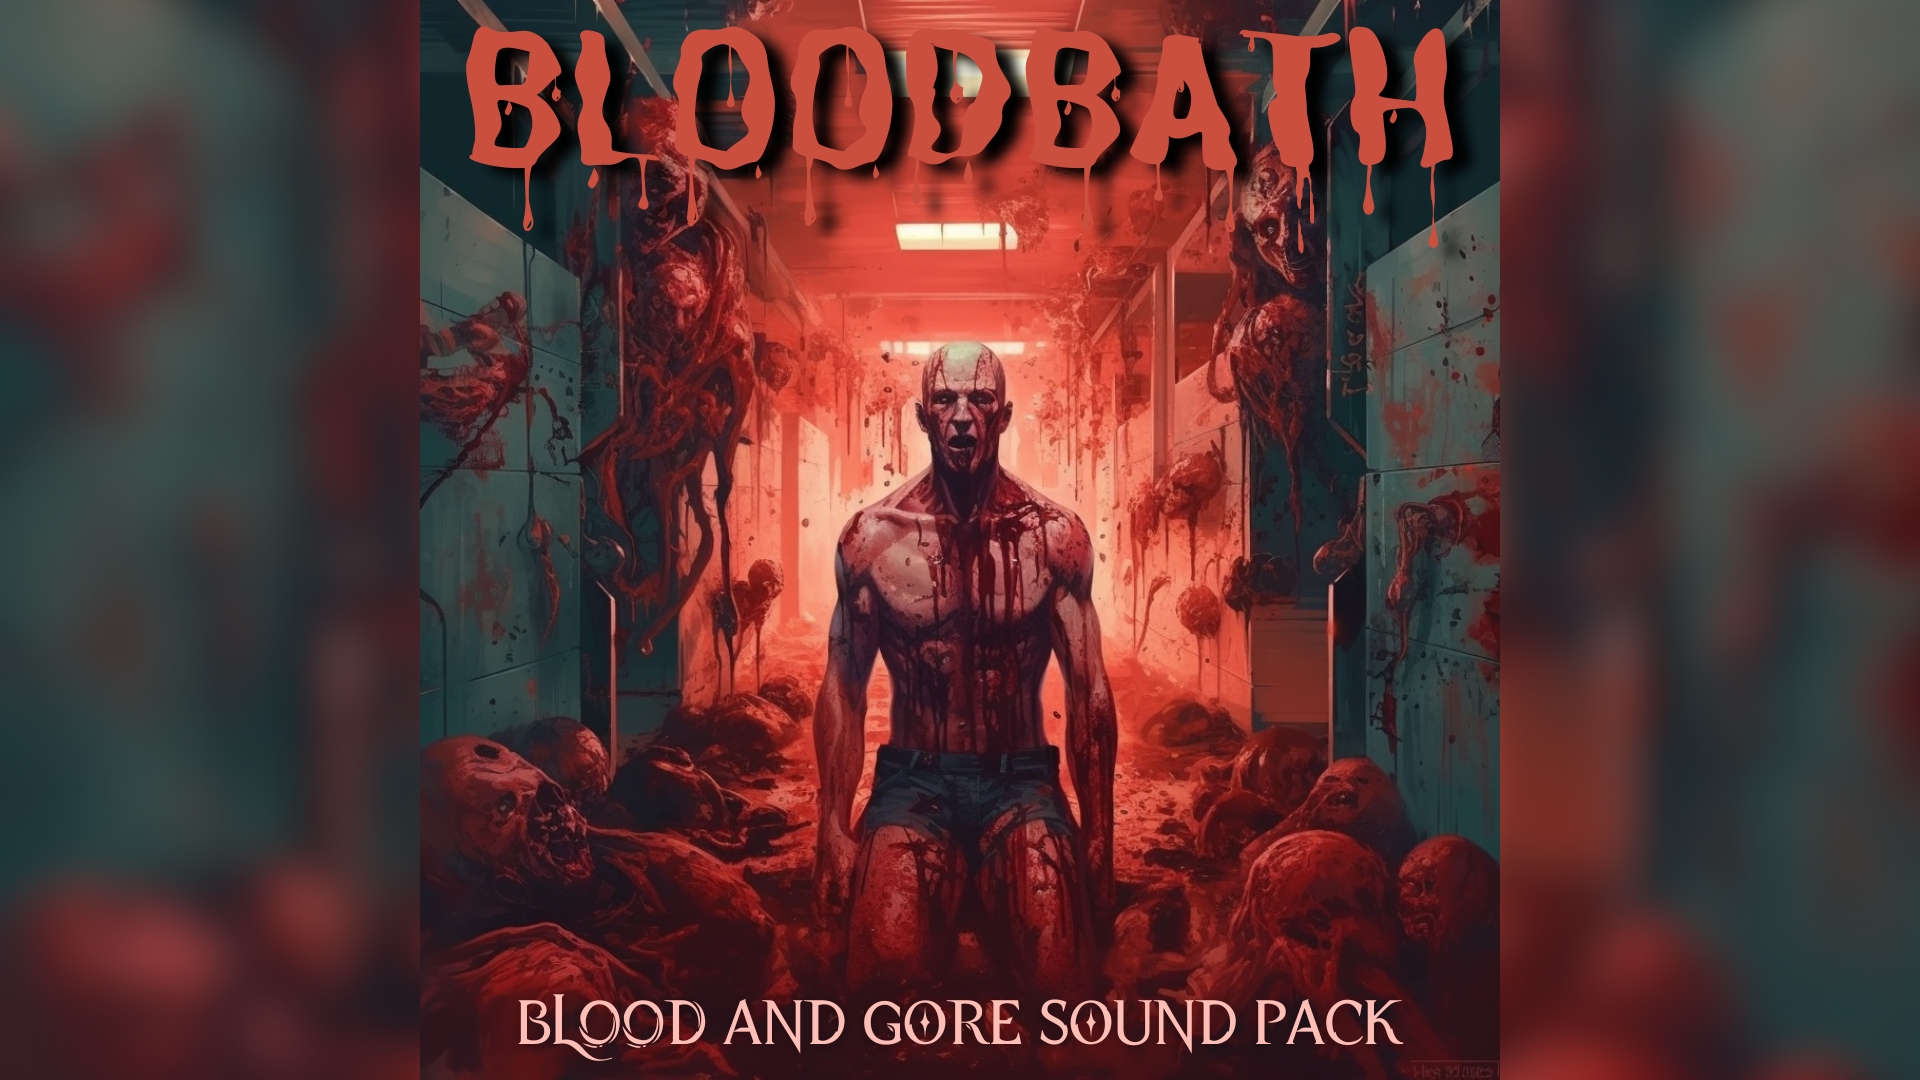 Bloodbath - Blood and Gore Sound Pack